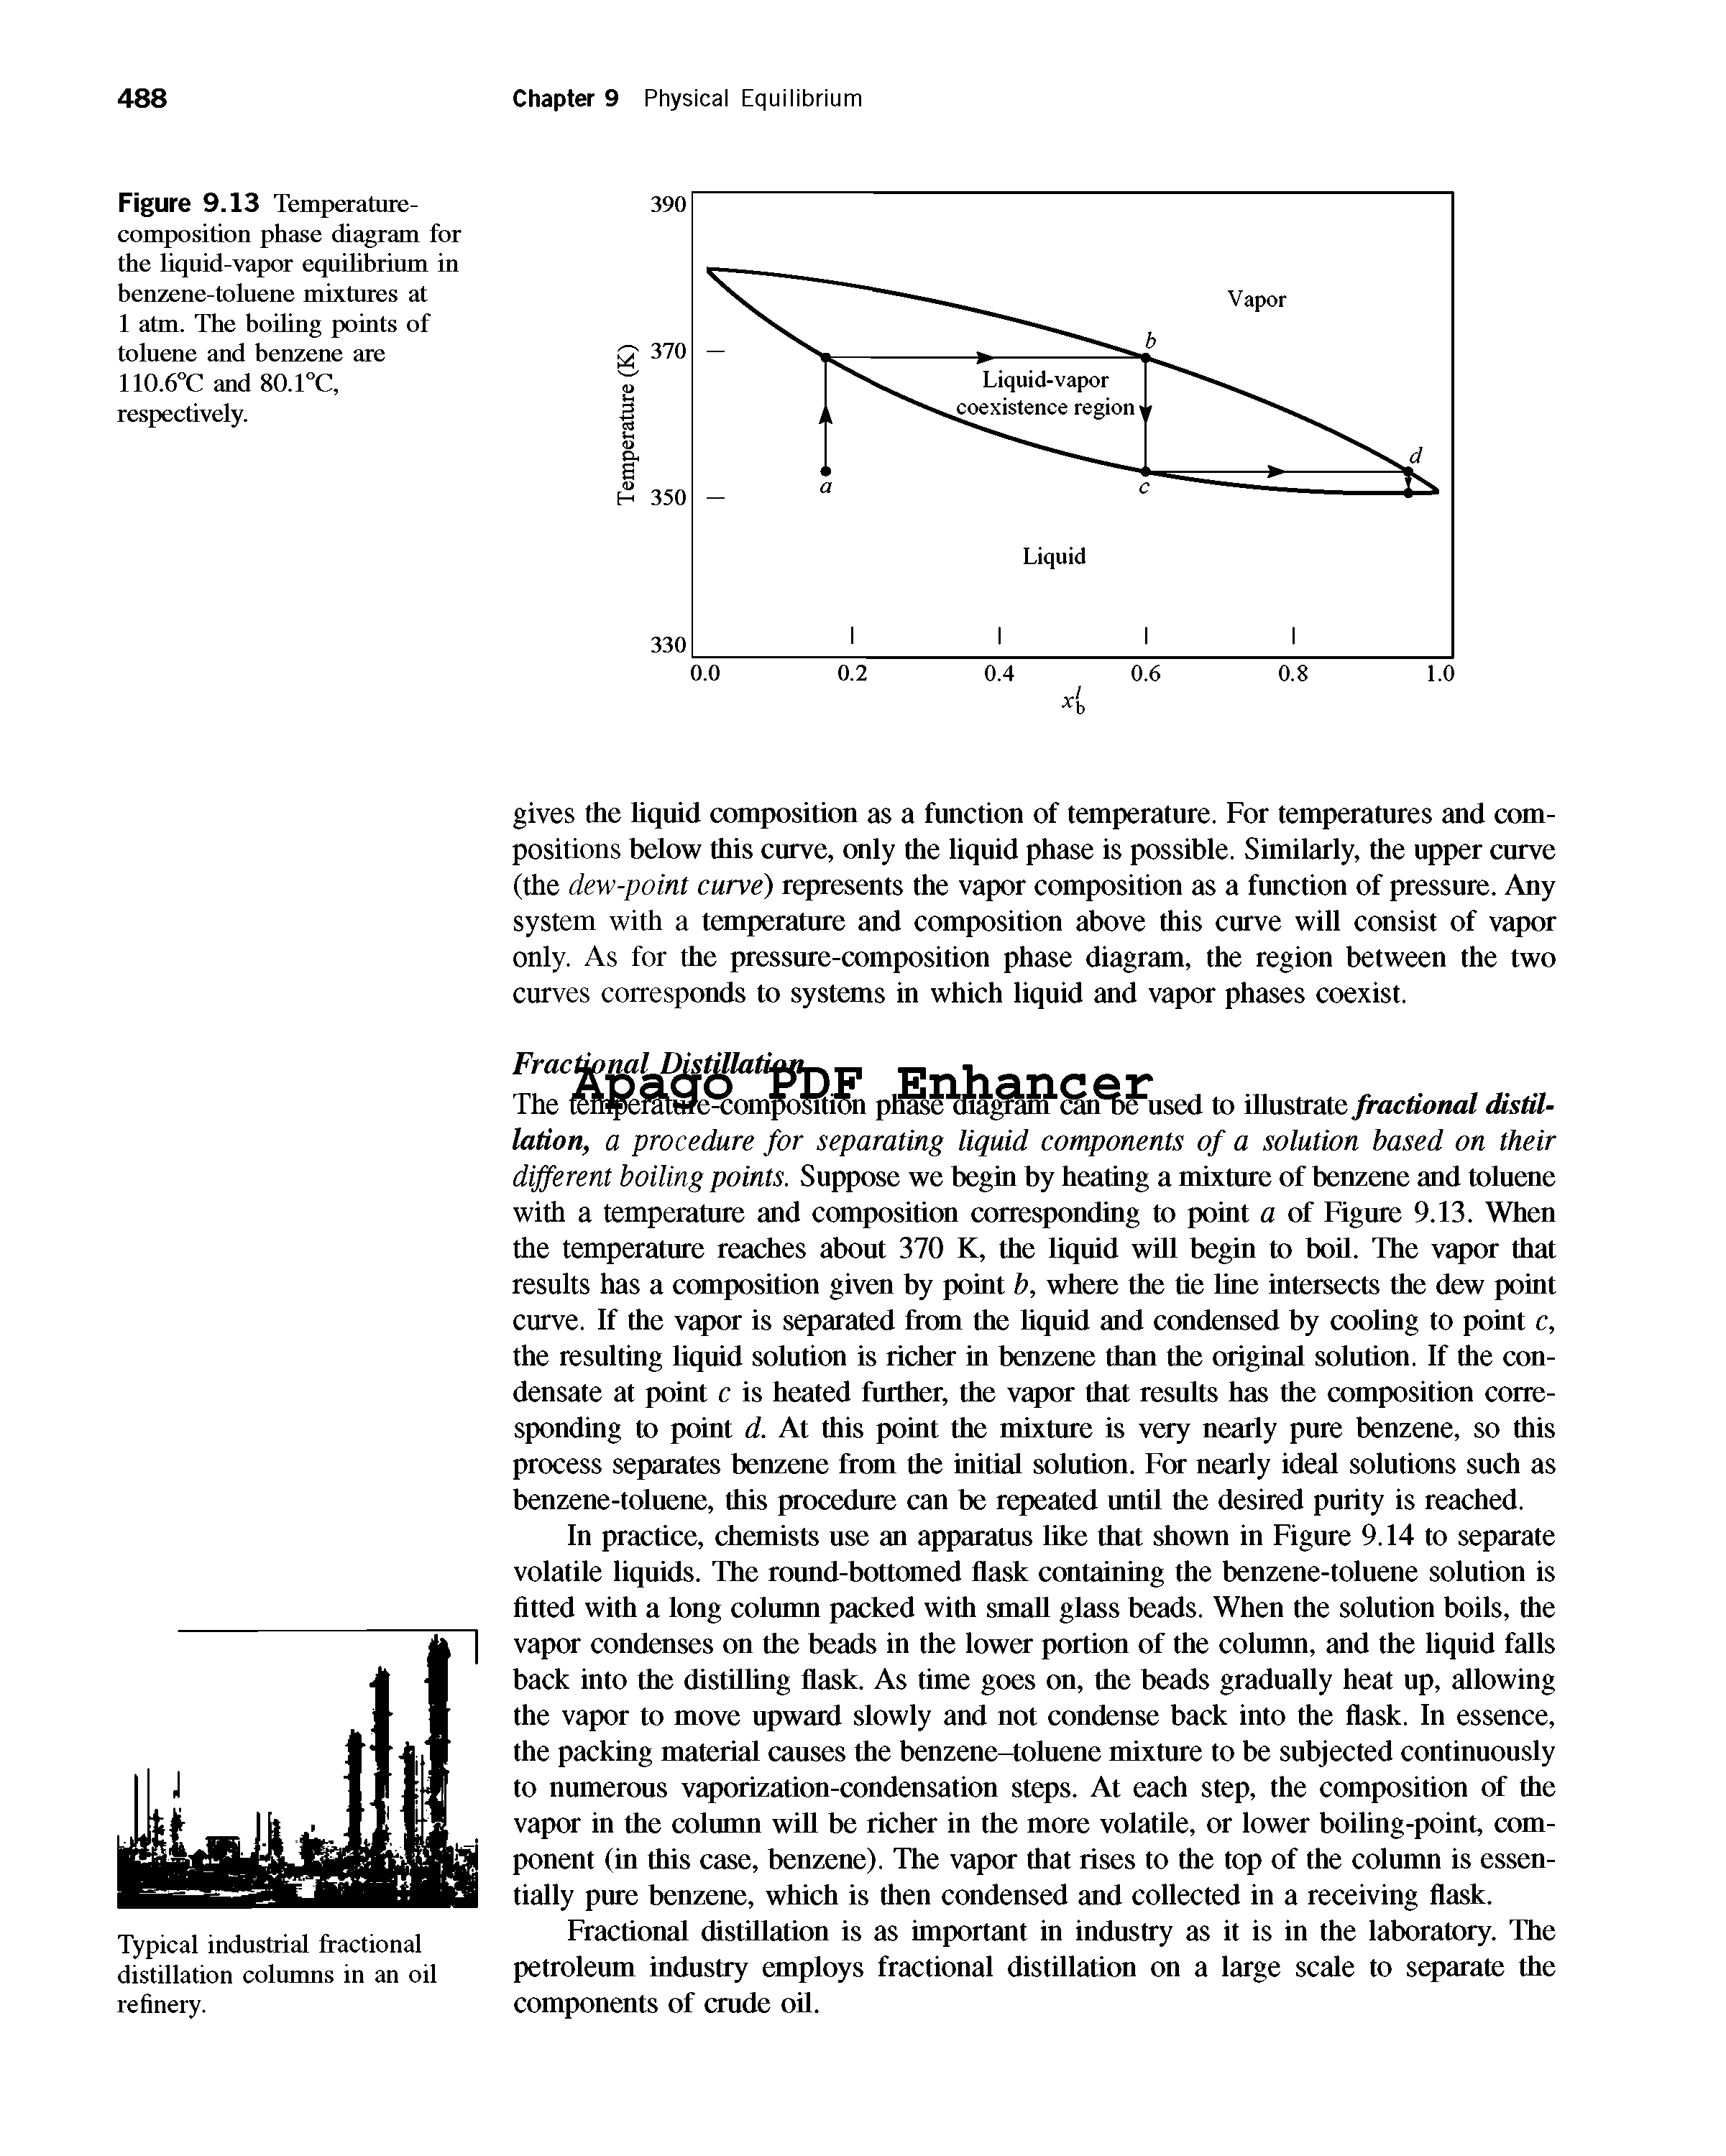 Figure 9.13 Temperature-composition phase diagram for the liquid-vapor equihbrium in benzene-toluene mixtures at 1 atm. The boihng points of toluene and benzene are 110.6°C and 80.1°C, respectively.